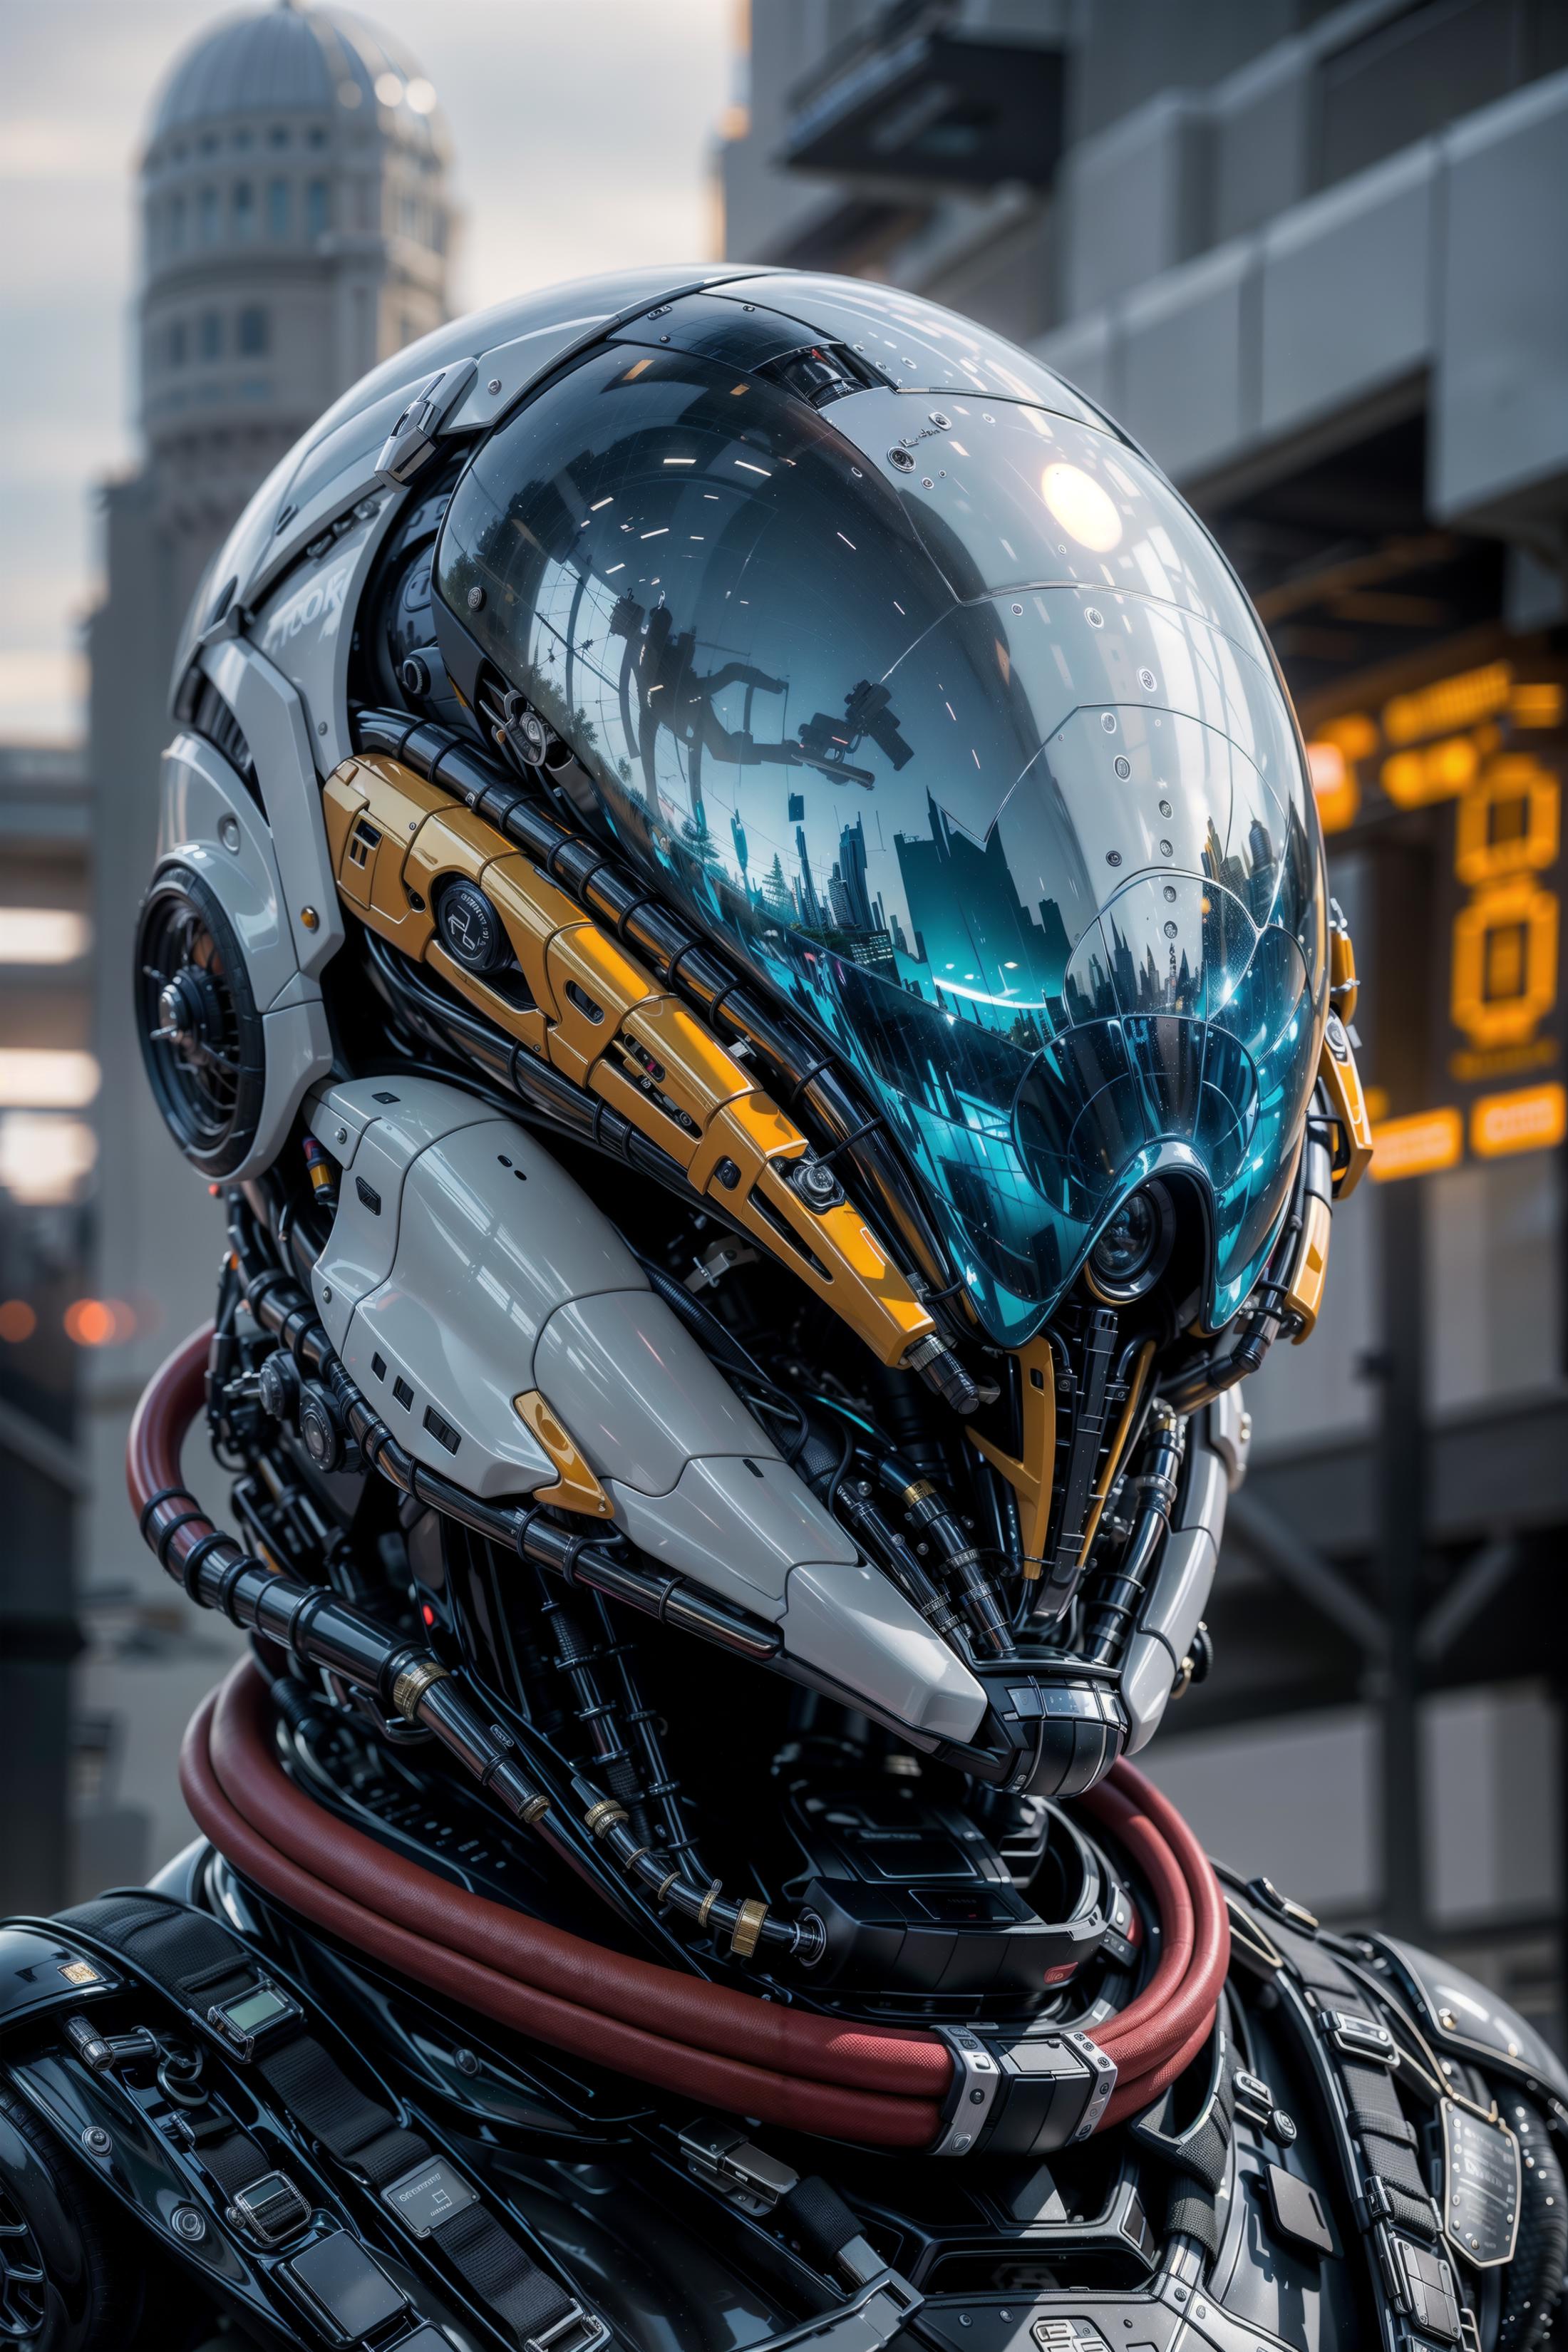 A futuristic robot head with a metallic and yellow color scheme, reflecting the cityscape.